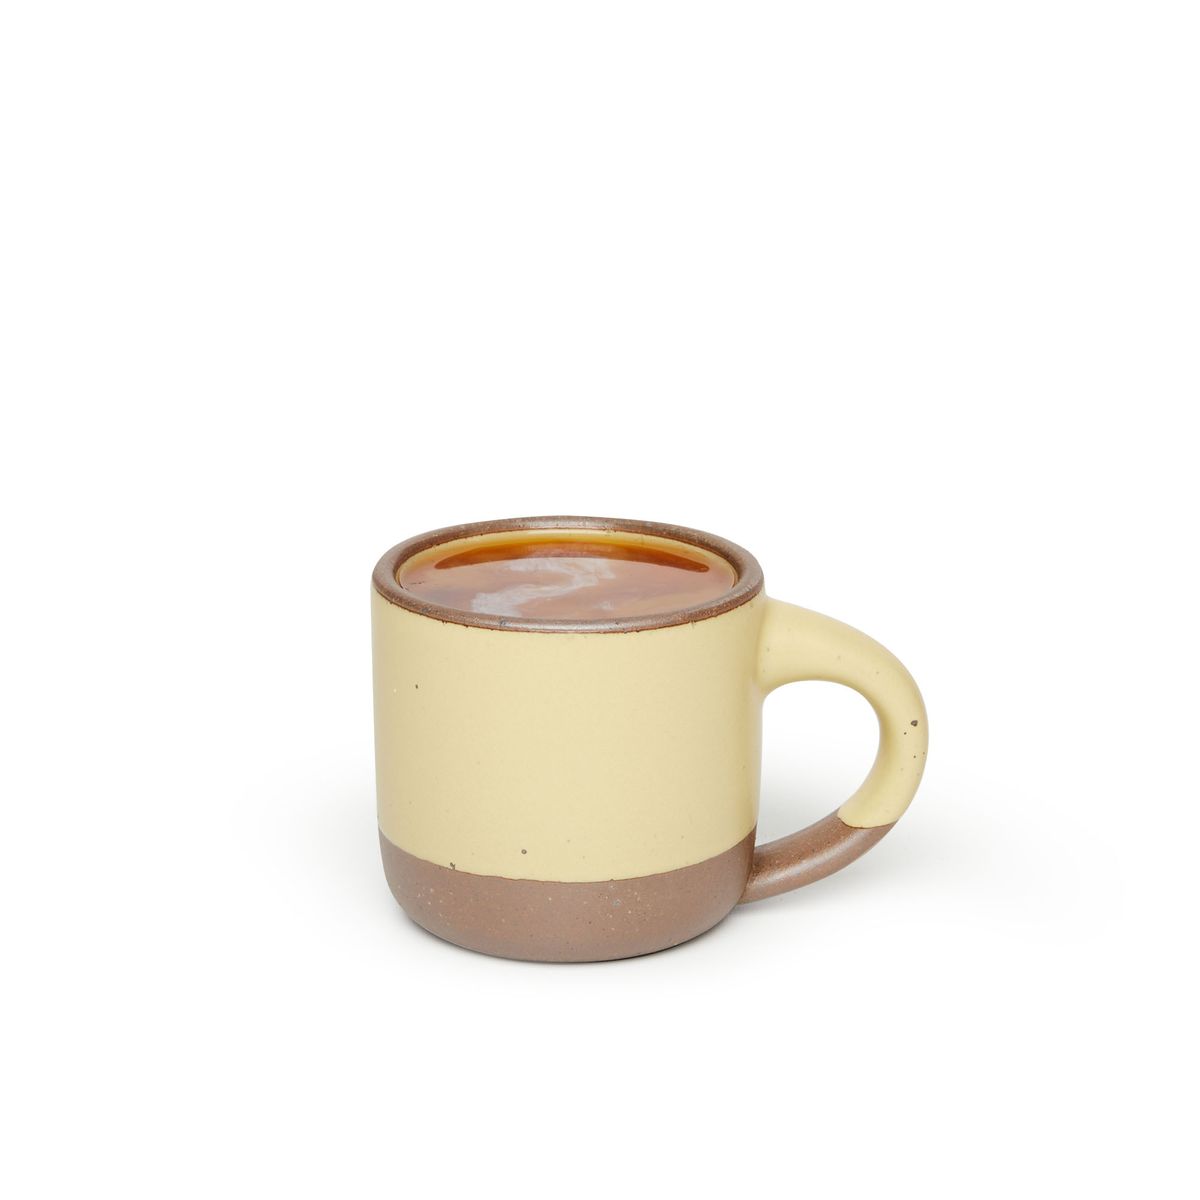 A small sized ceramic mug with handle in a light butter yellow glaze featuring iron speckles and unglazed rim and bottom base, filled with coffee.